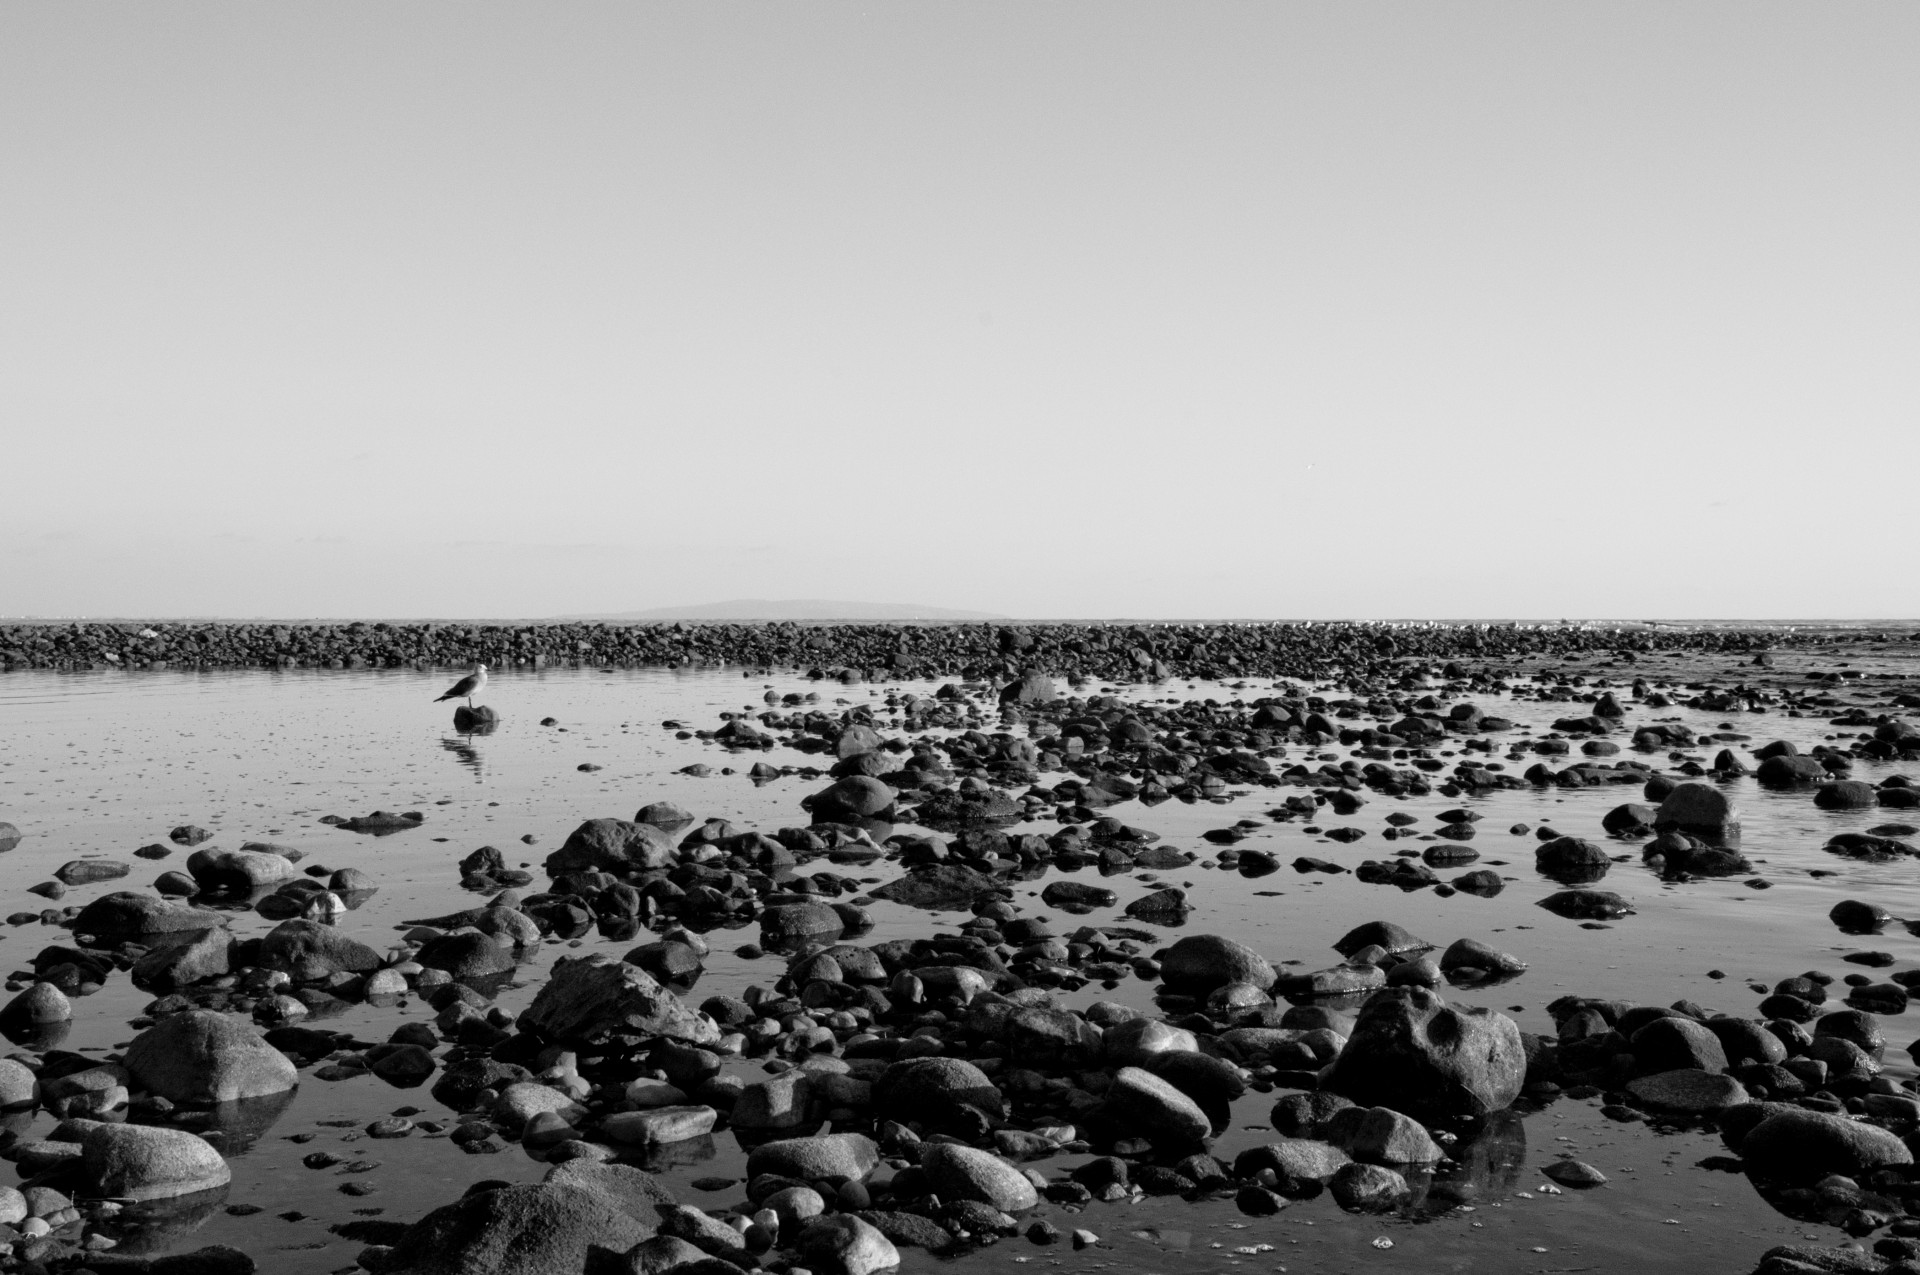 black and white photo of low tide with many rocks and a lone seagull looking for food